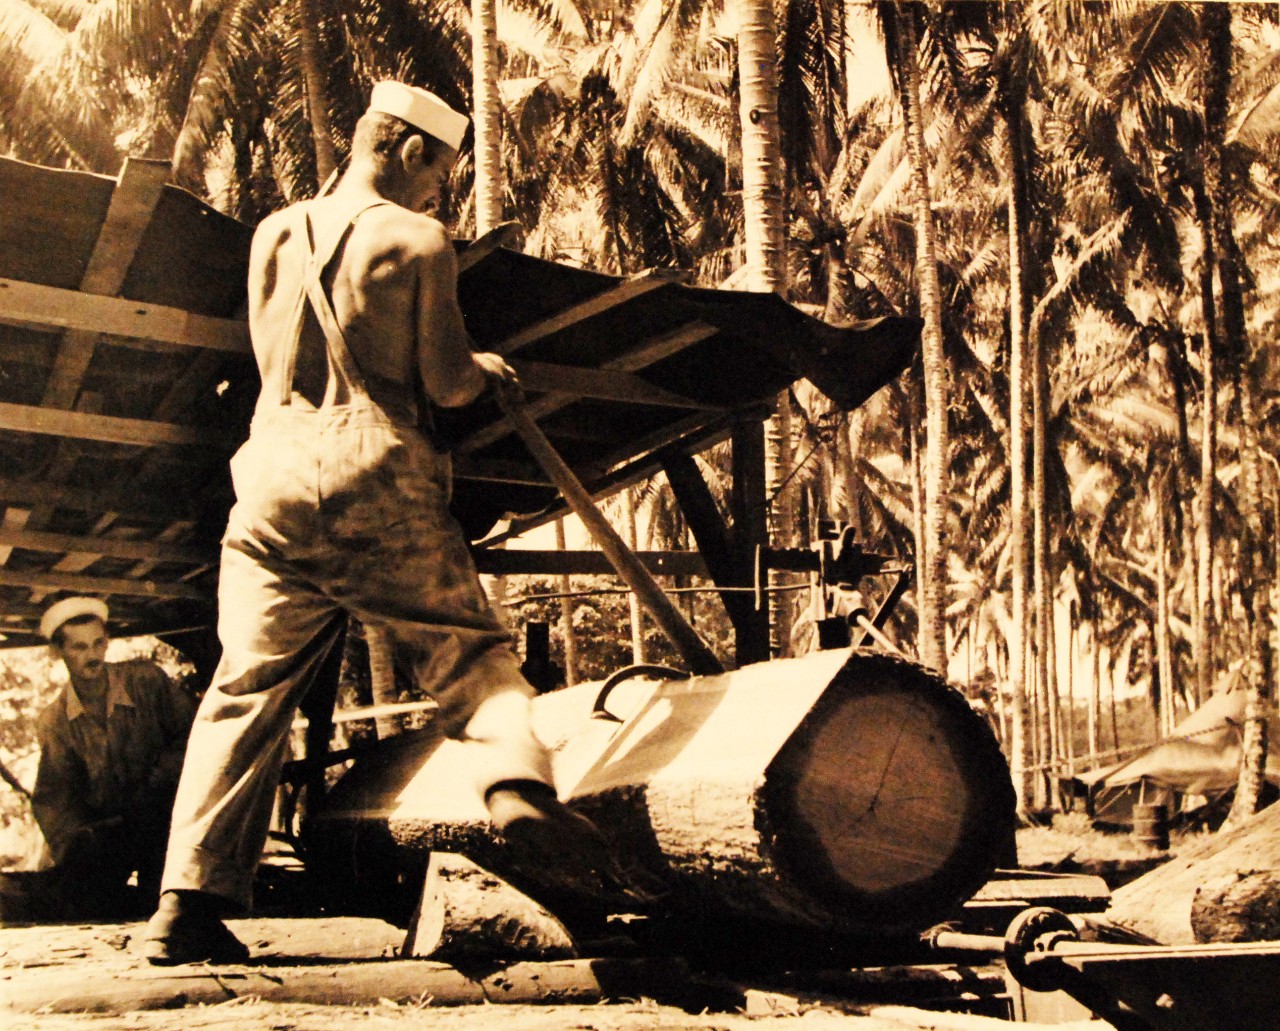 80-G-39222: Guadalcanal Campaign, August 1942-February 1943.  Navy Seabees doing construction work at Guadalcanal, working in the sawmill, January 30, 1943.   Official U.S. Navy photograph, now in the collections of the National Archives.  (2016/12/06).